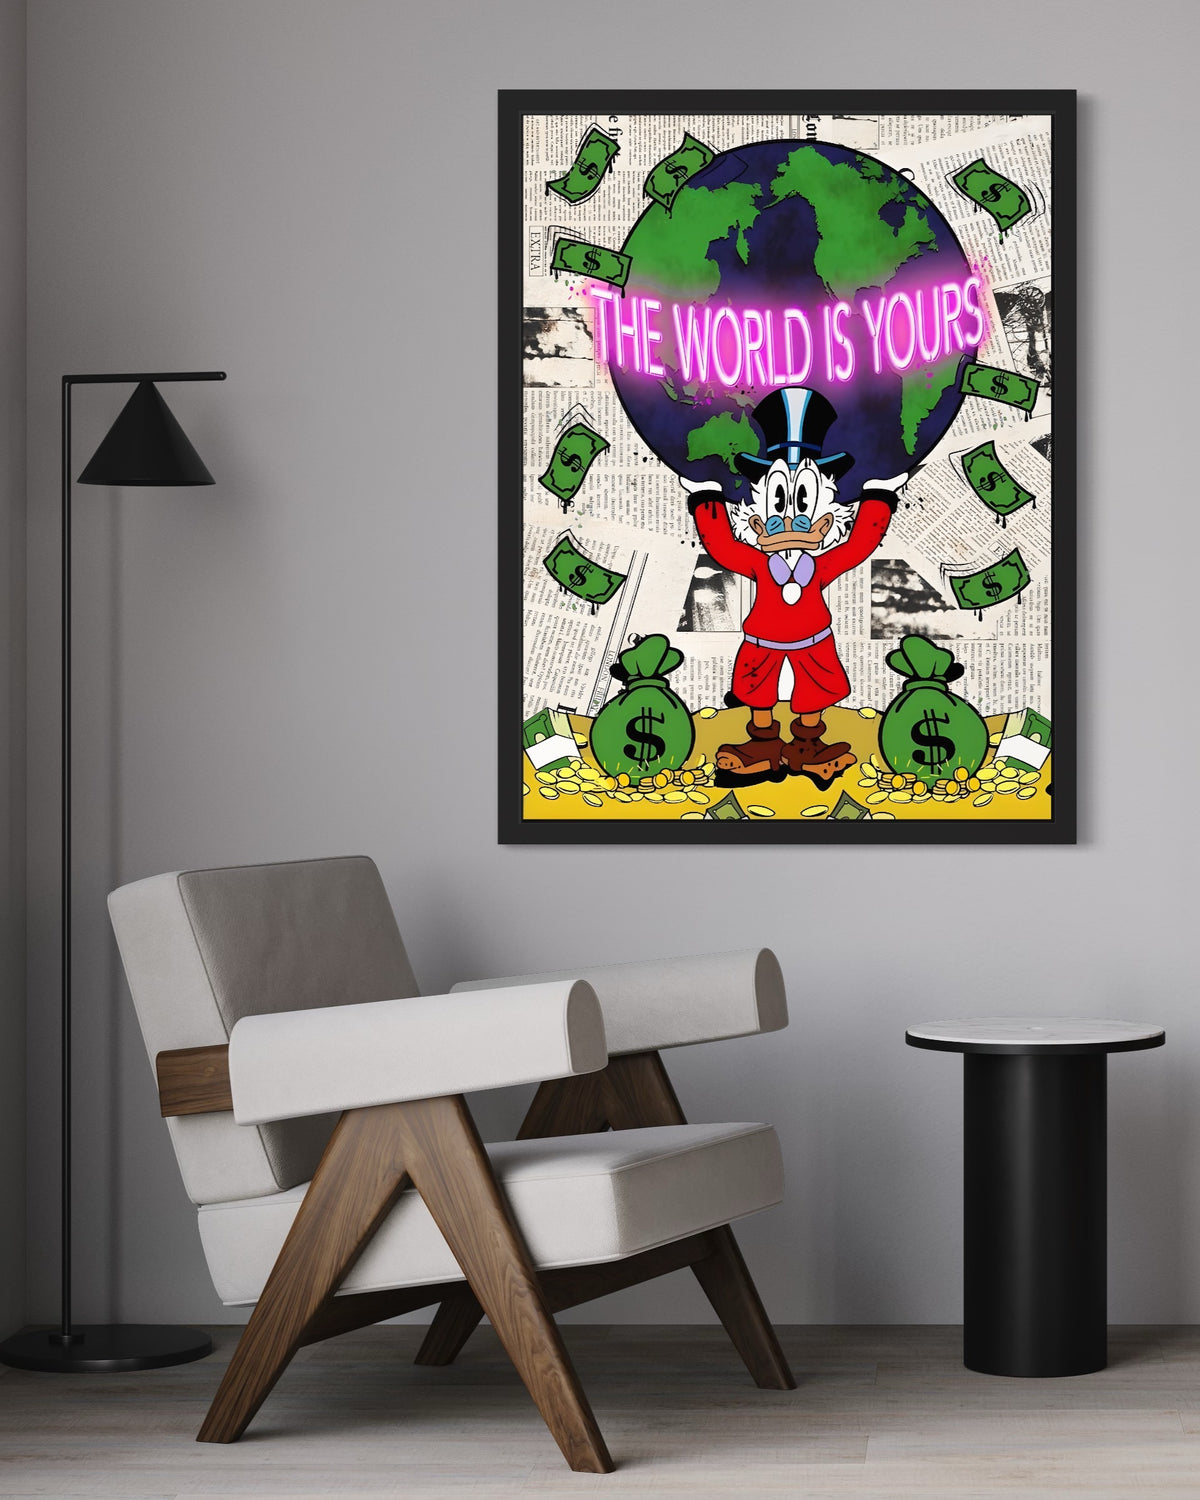 THE WORLD IS YOURS III - CANVAS WALL ART